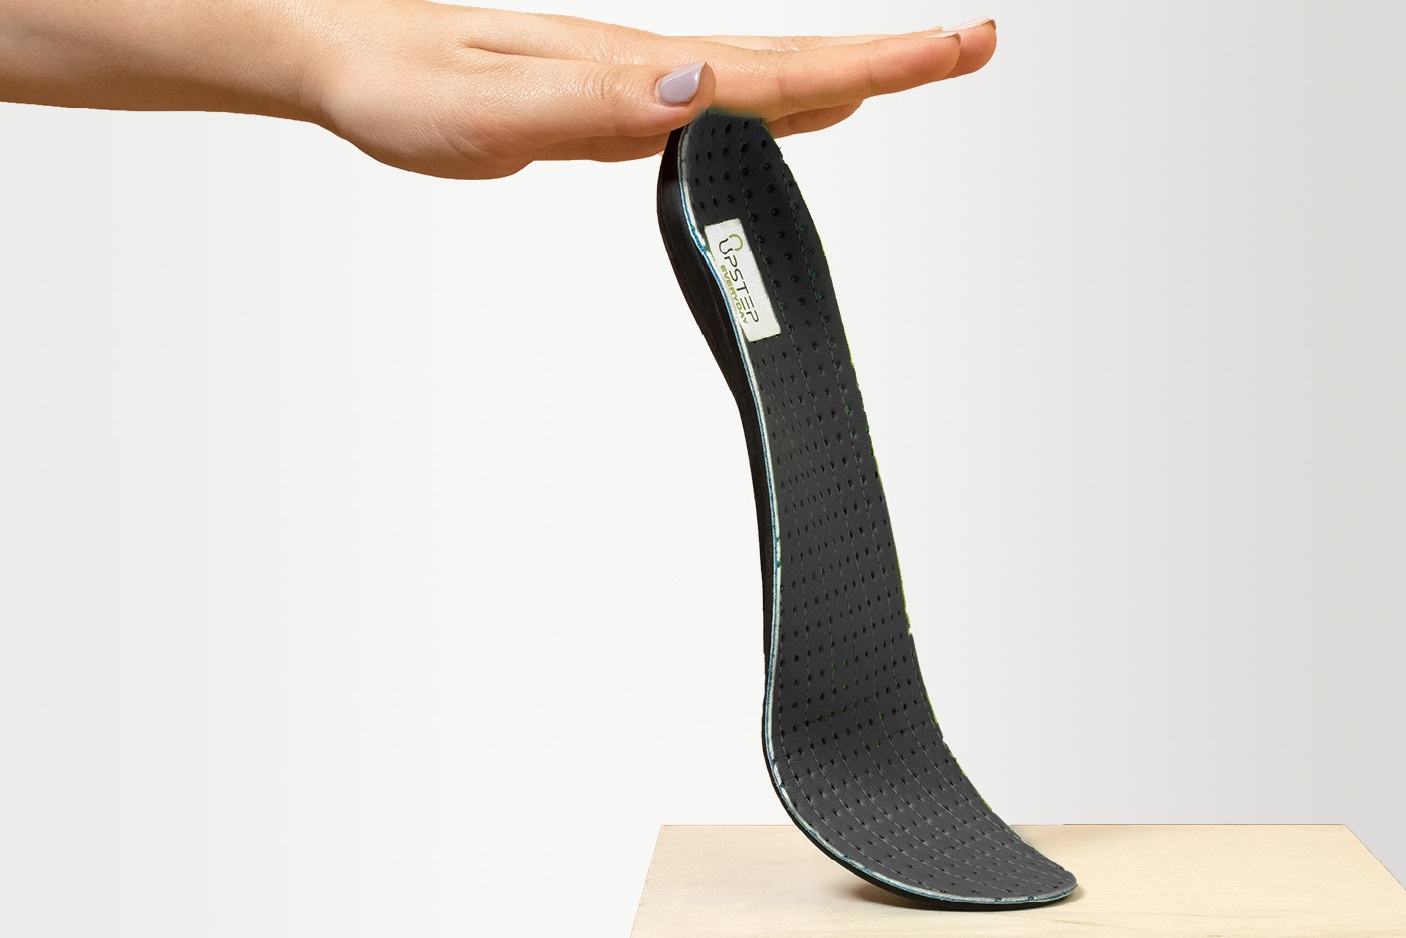 A hand holding a black insole for viewing